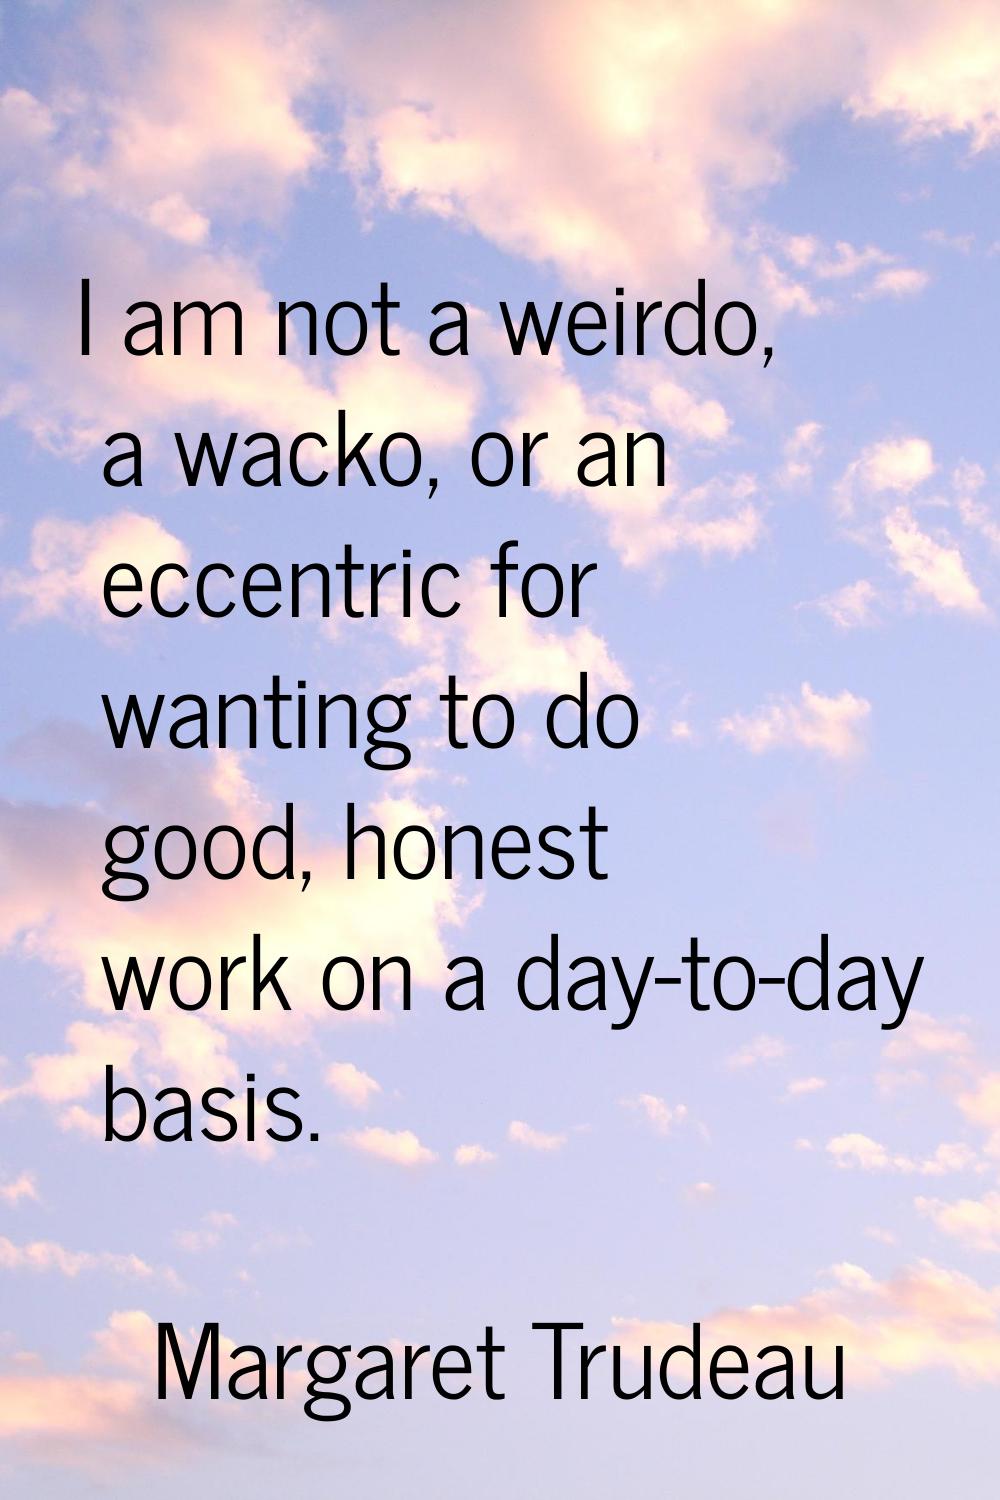 I am not a weirdo, a wacko, or an eccentric for wanting to do good, honest work on a day-to-day bas